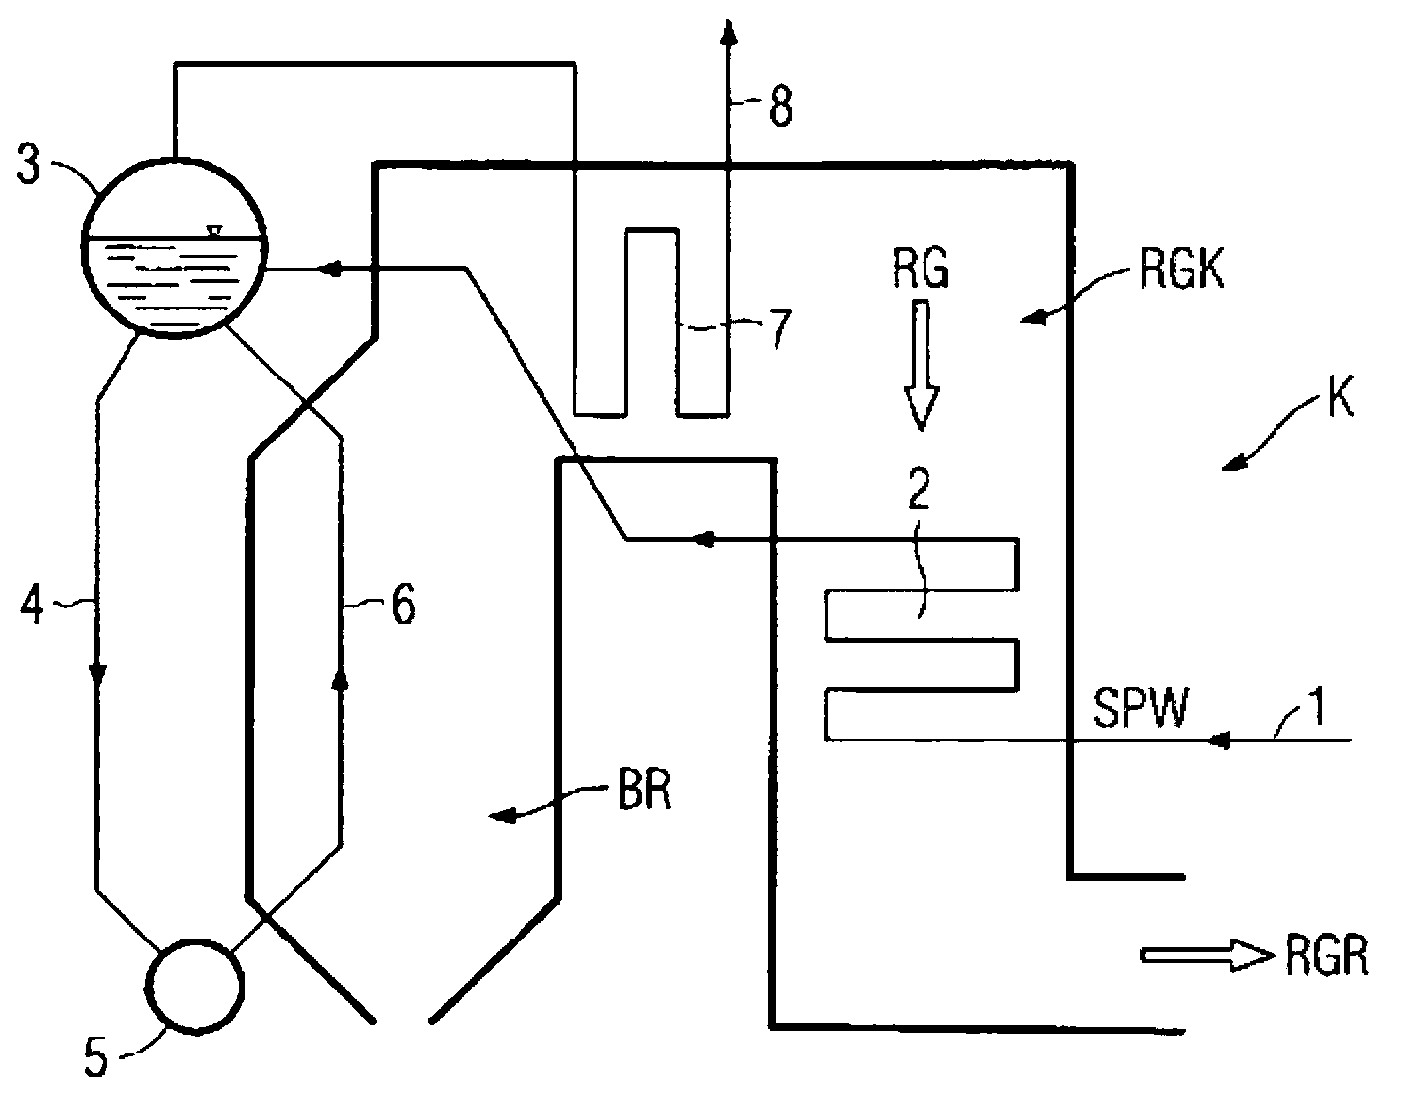 Method and device for controlling the temperature of steam in a boiler